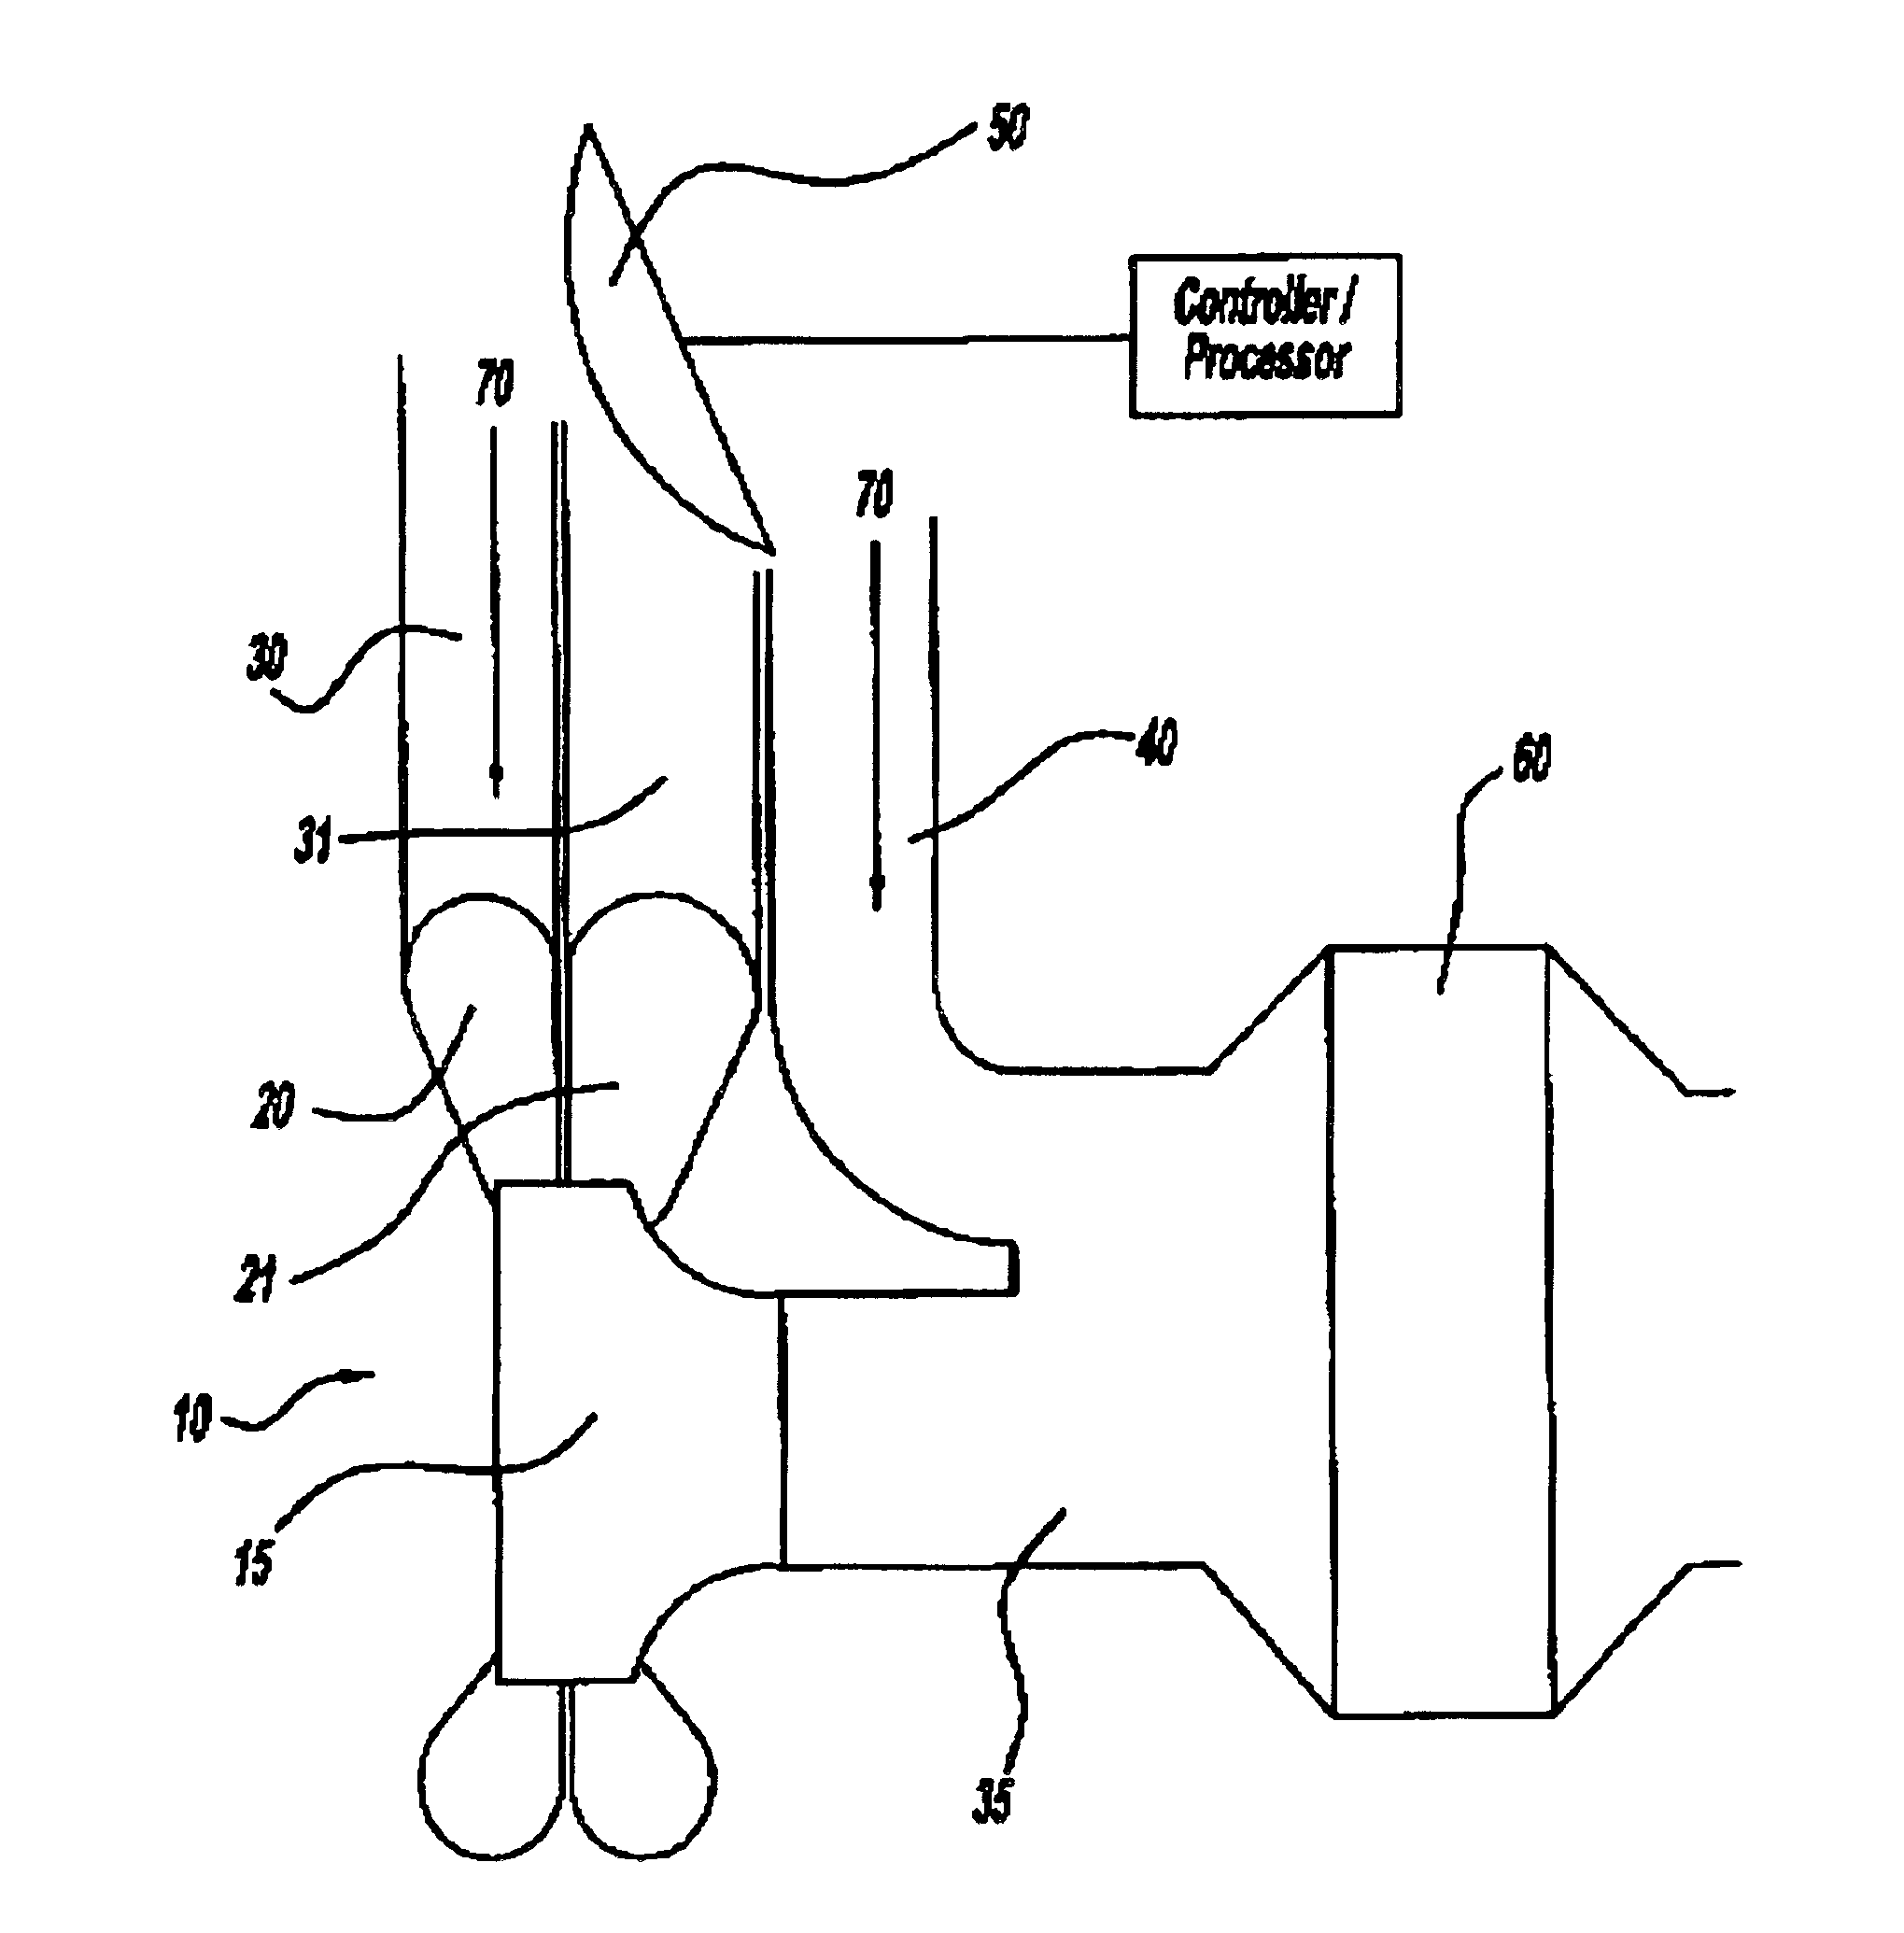 Integrated bypass and variable geometry configuration for an exhaust gas turbocharger